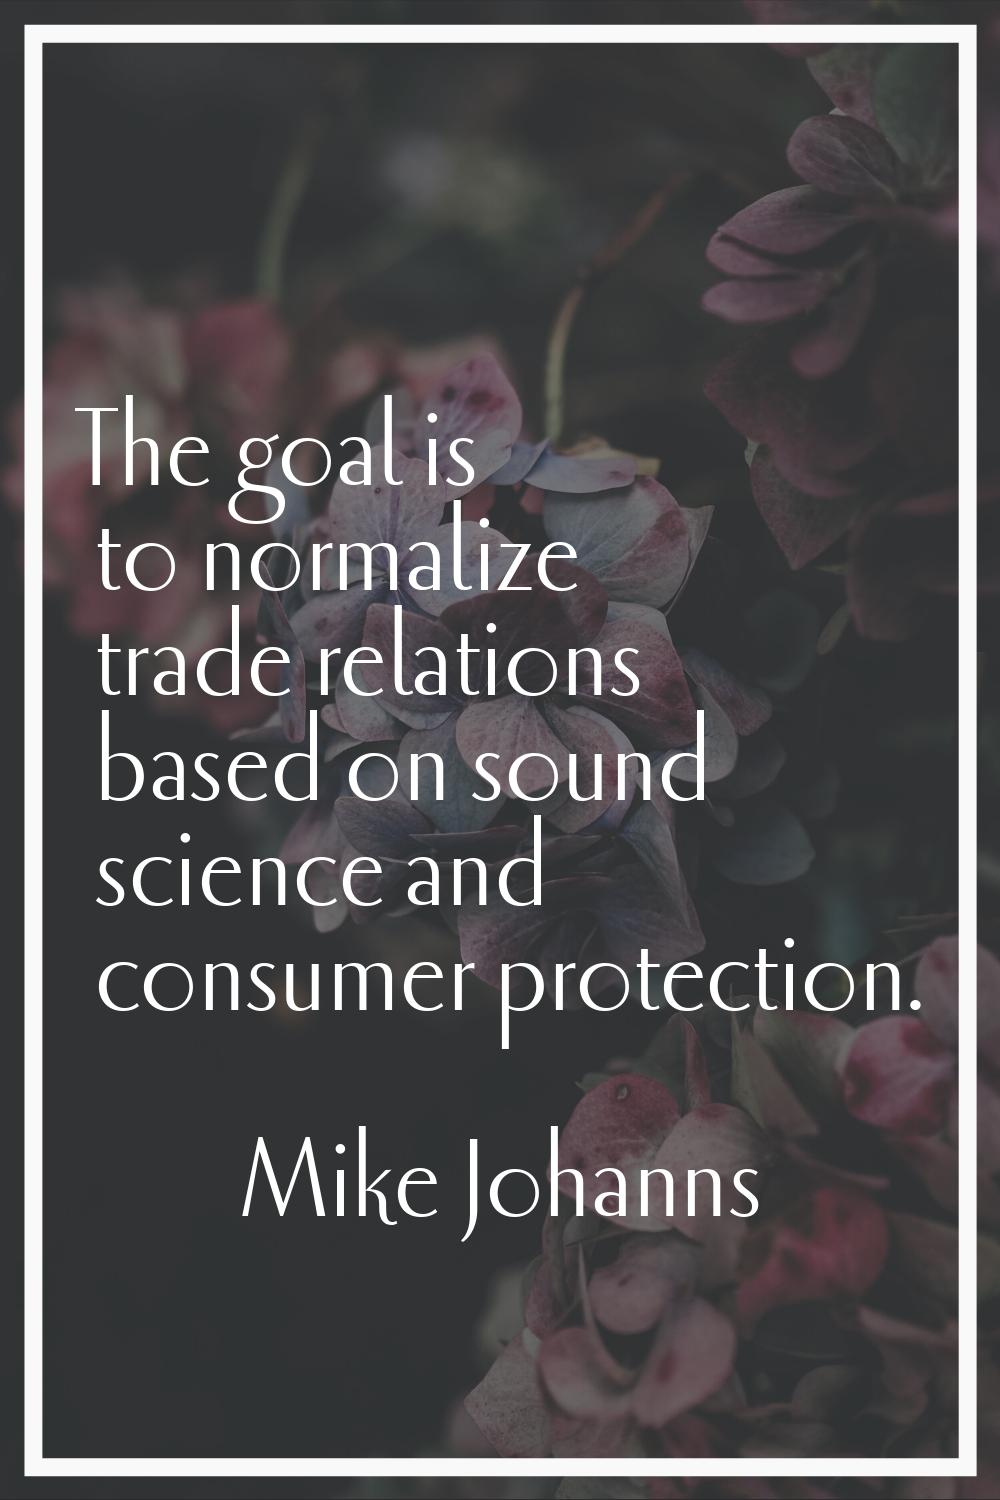 The goal is to normalize trade relations based on sound science and consumer protection.